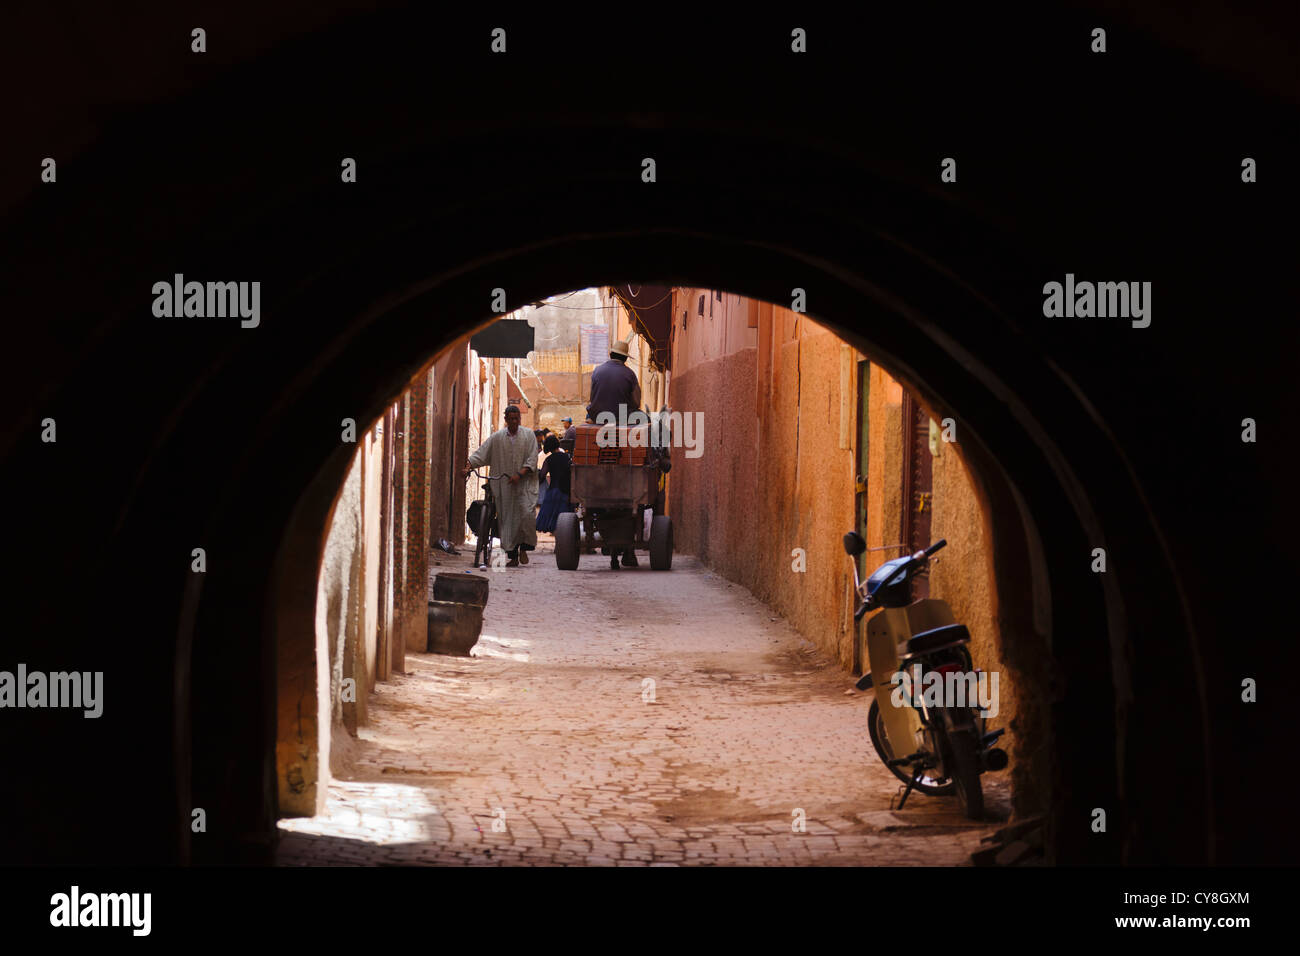 Street view in the old medina, Marrakech, Morocco Stock Photo